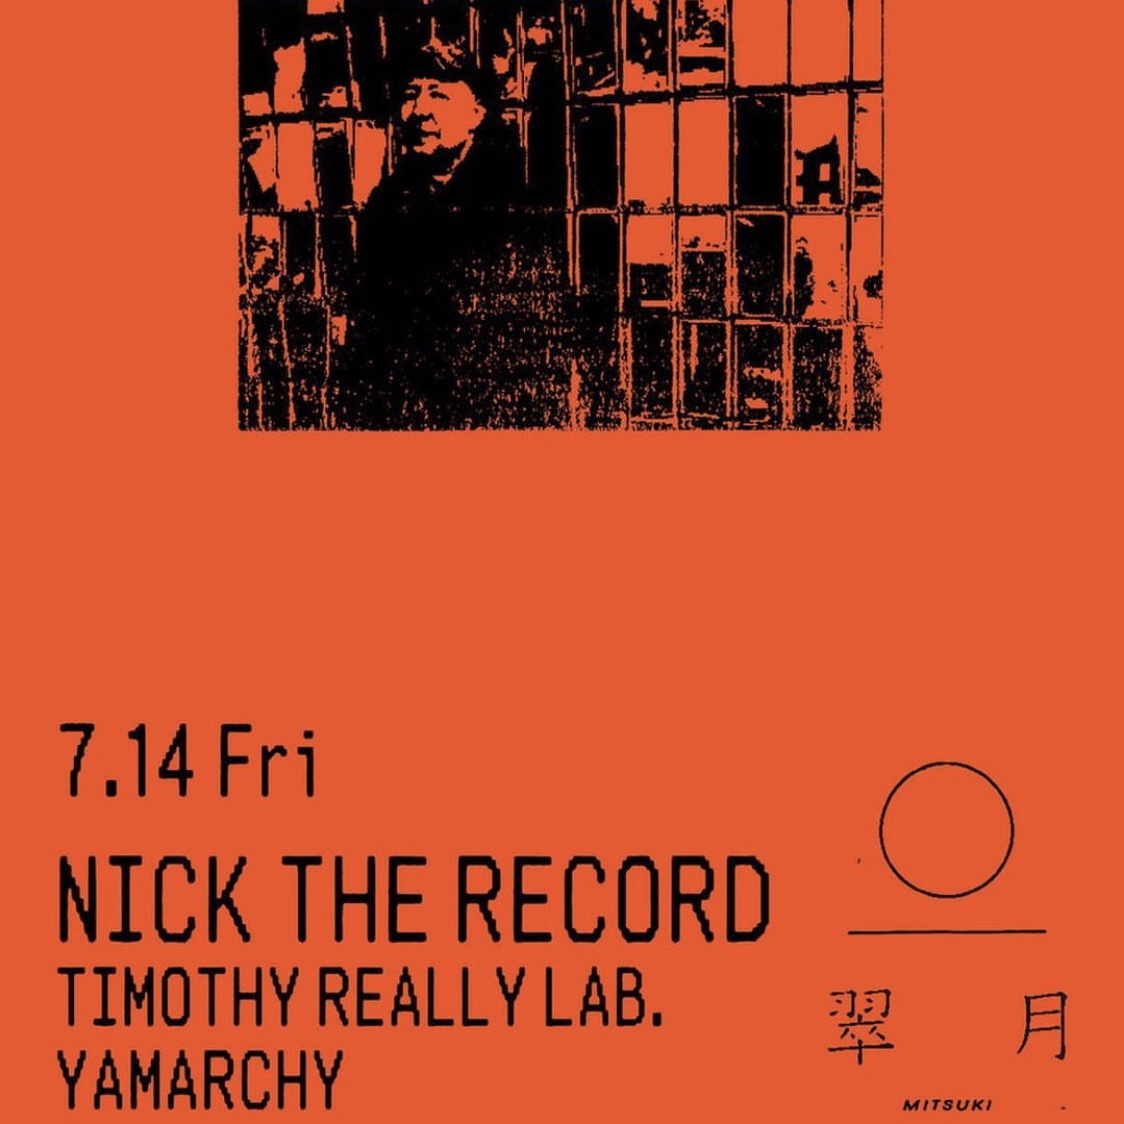 Nick the record with Timothy Really Lab